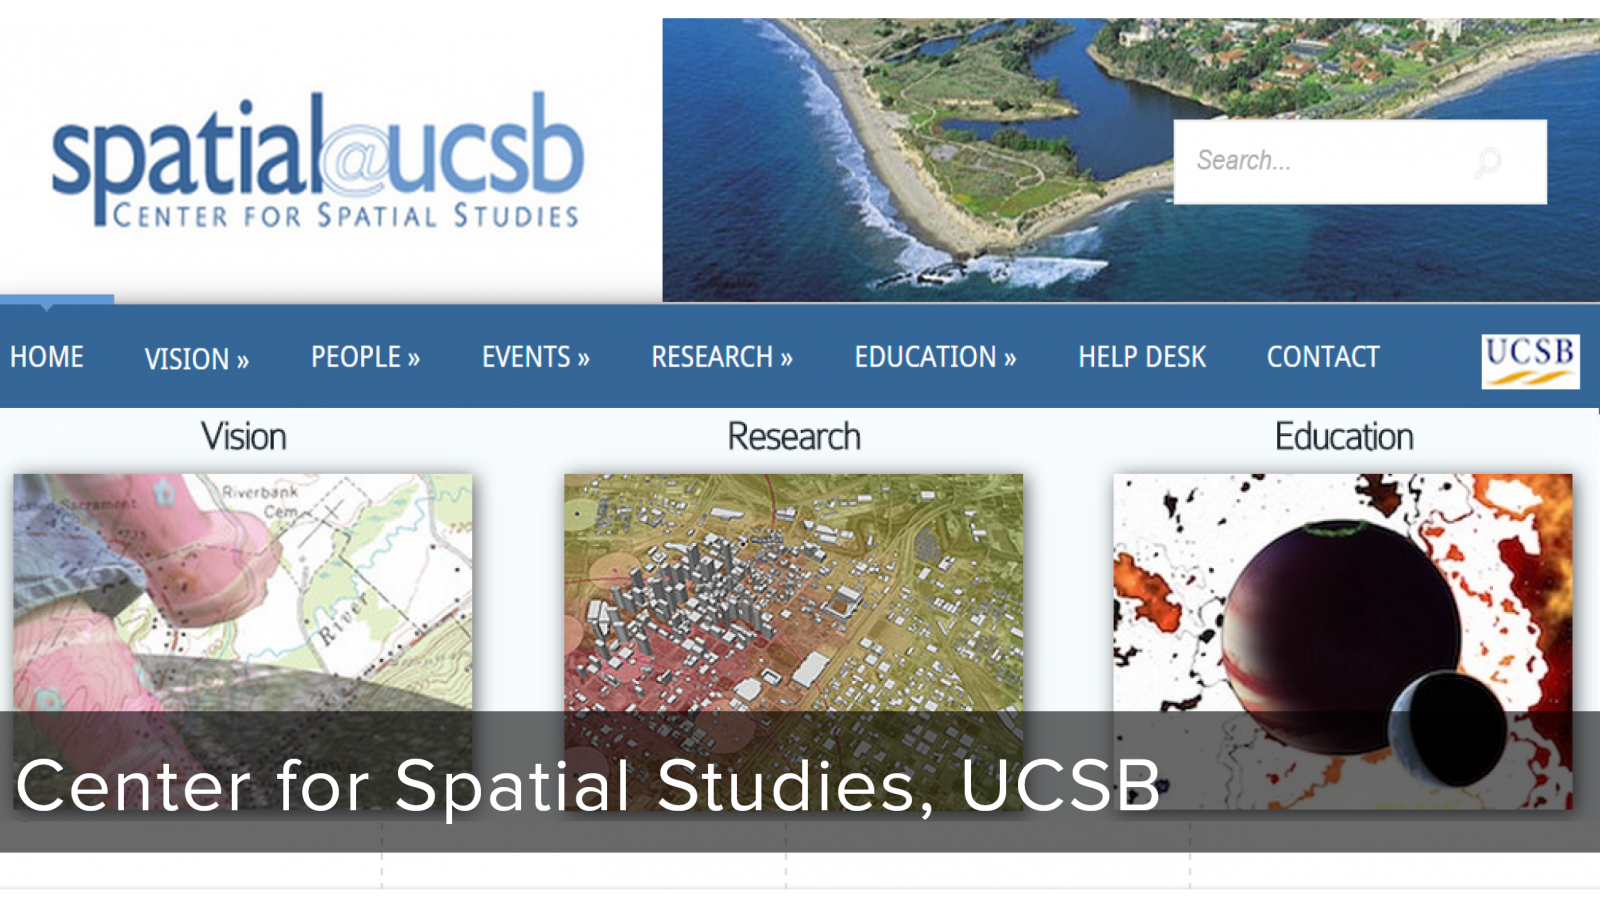 CSS, UCSB